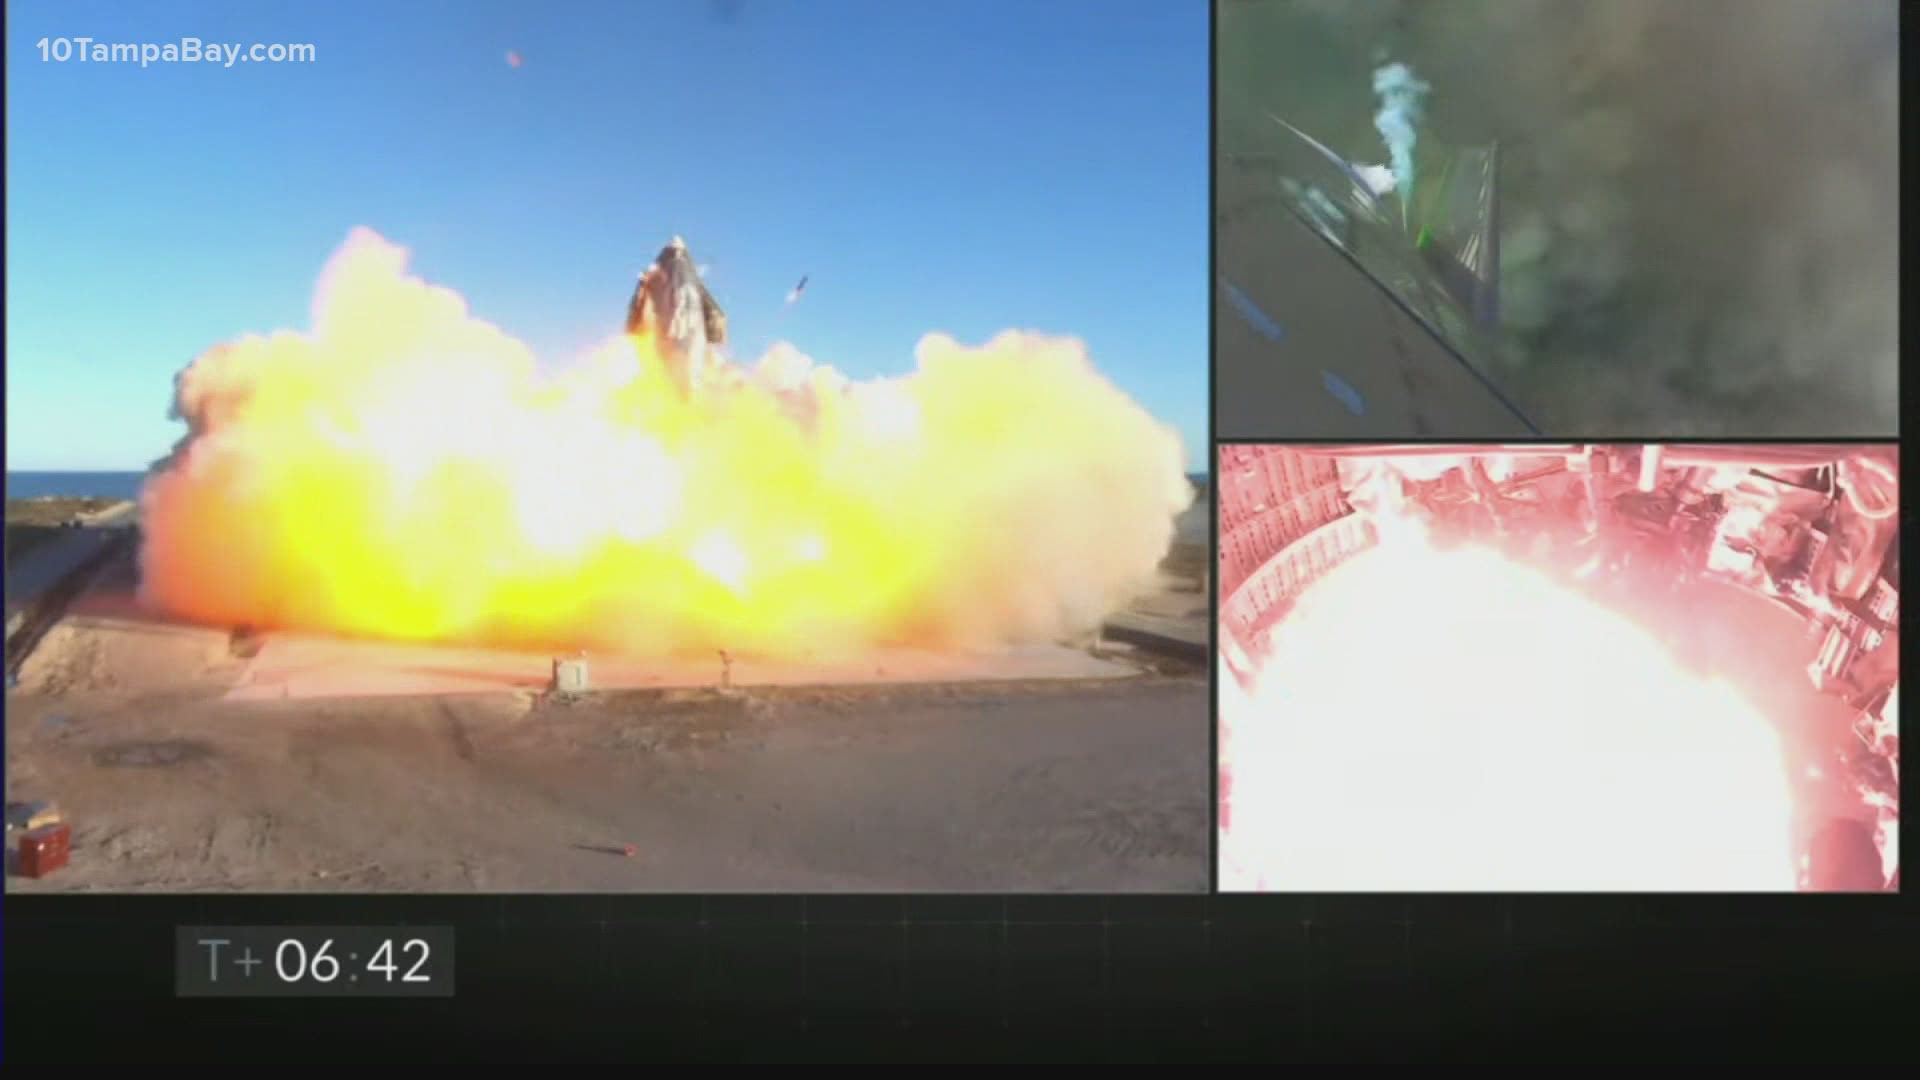 The test flight of SN8 ended in a fiery explosion, but according to Elon Musk that was not entirely unexpected.